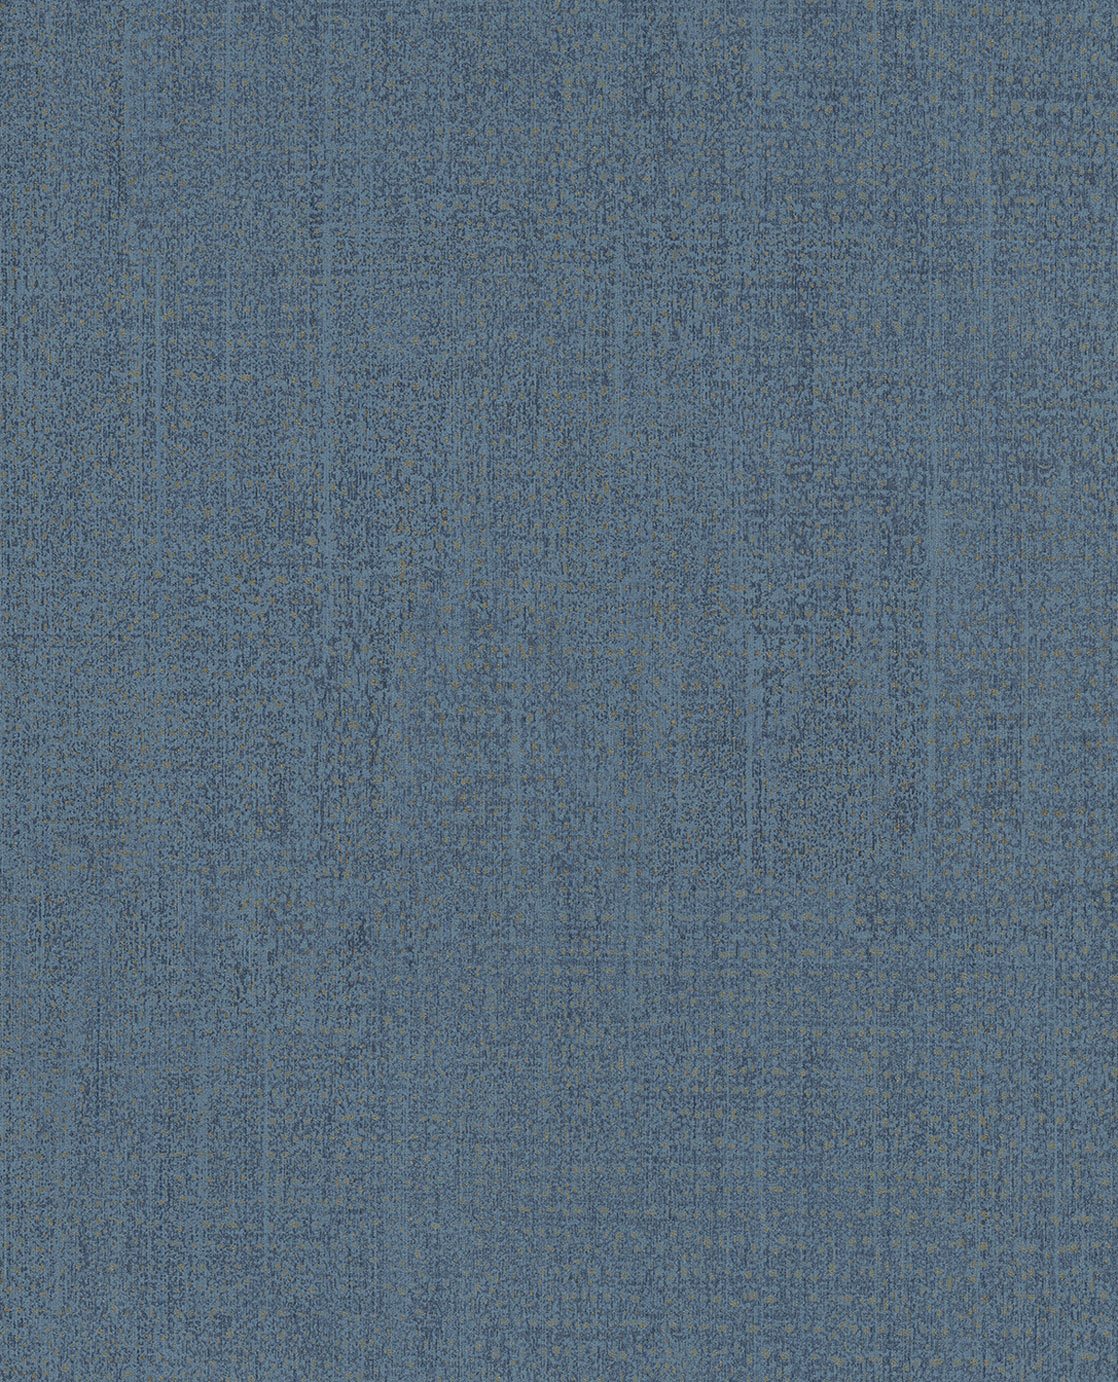 Dotted Texture - Blue